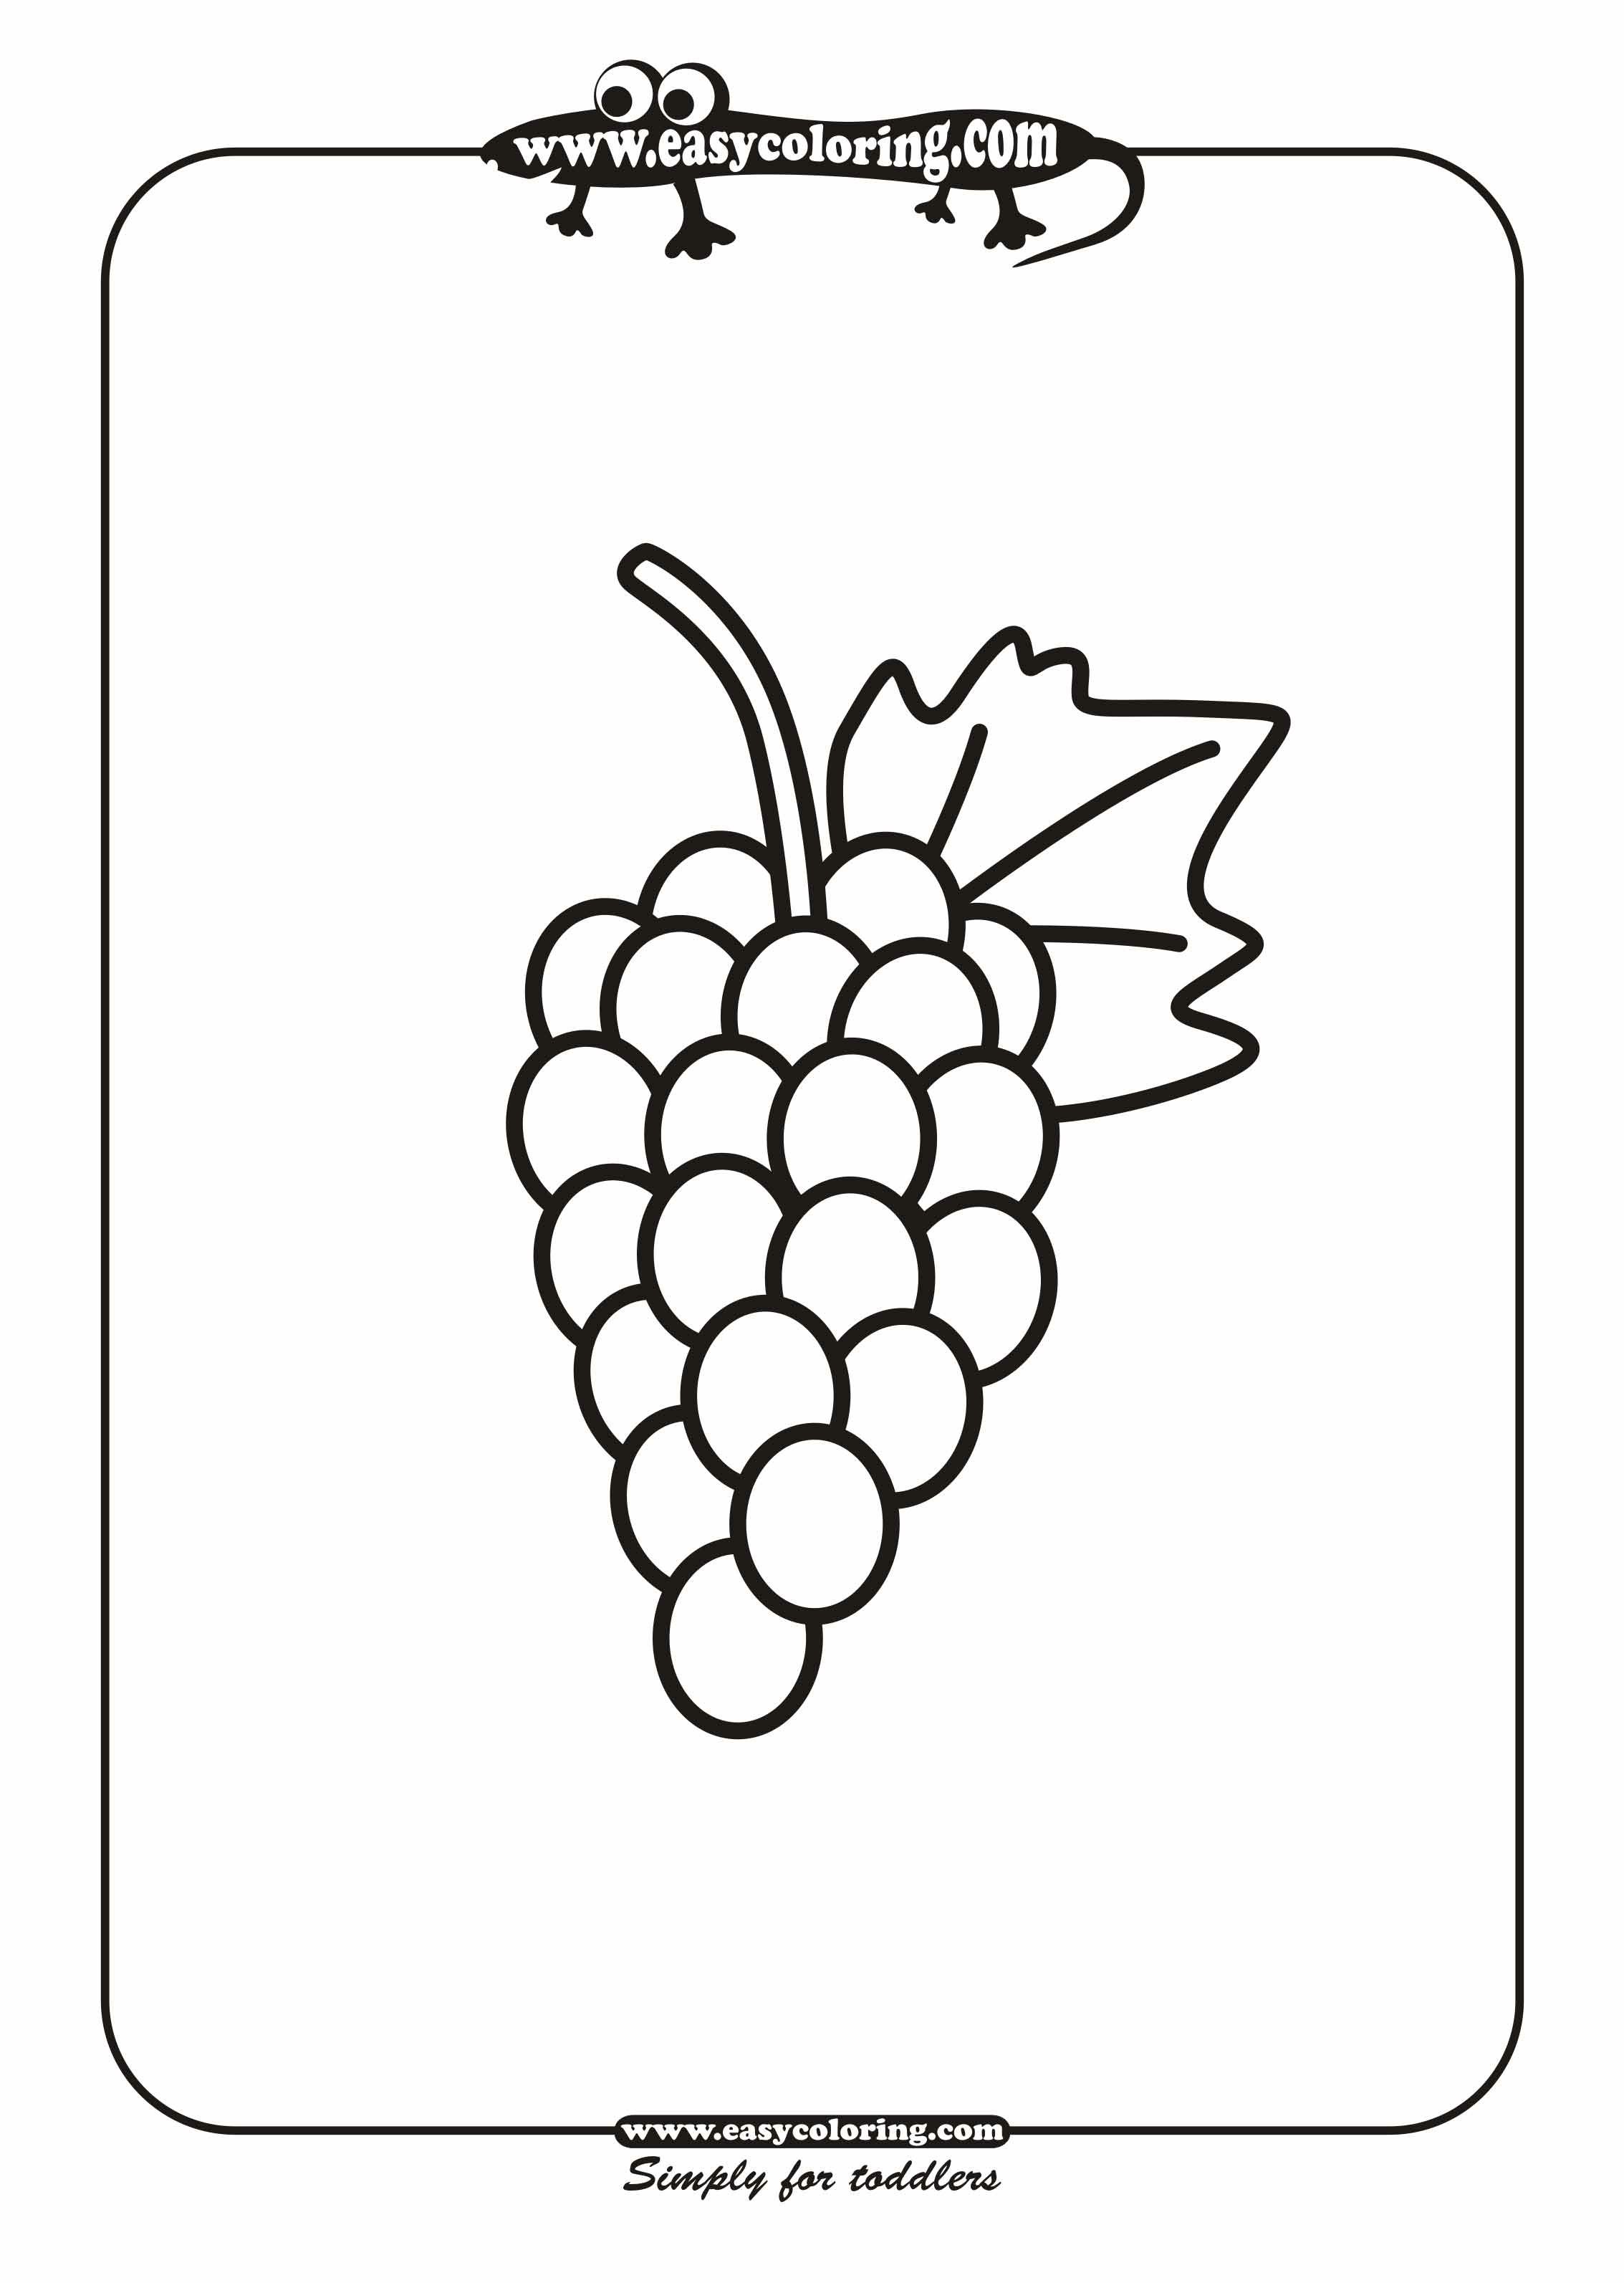 G For Grapes Coloring Page Grape Vine Coloring Sheet. Kids ...